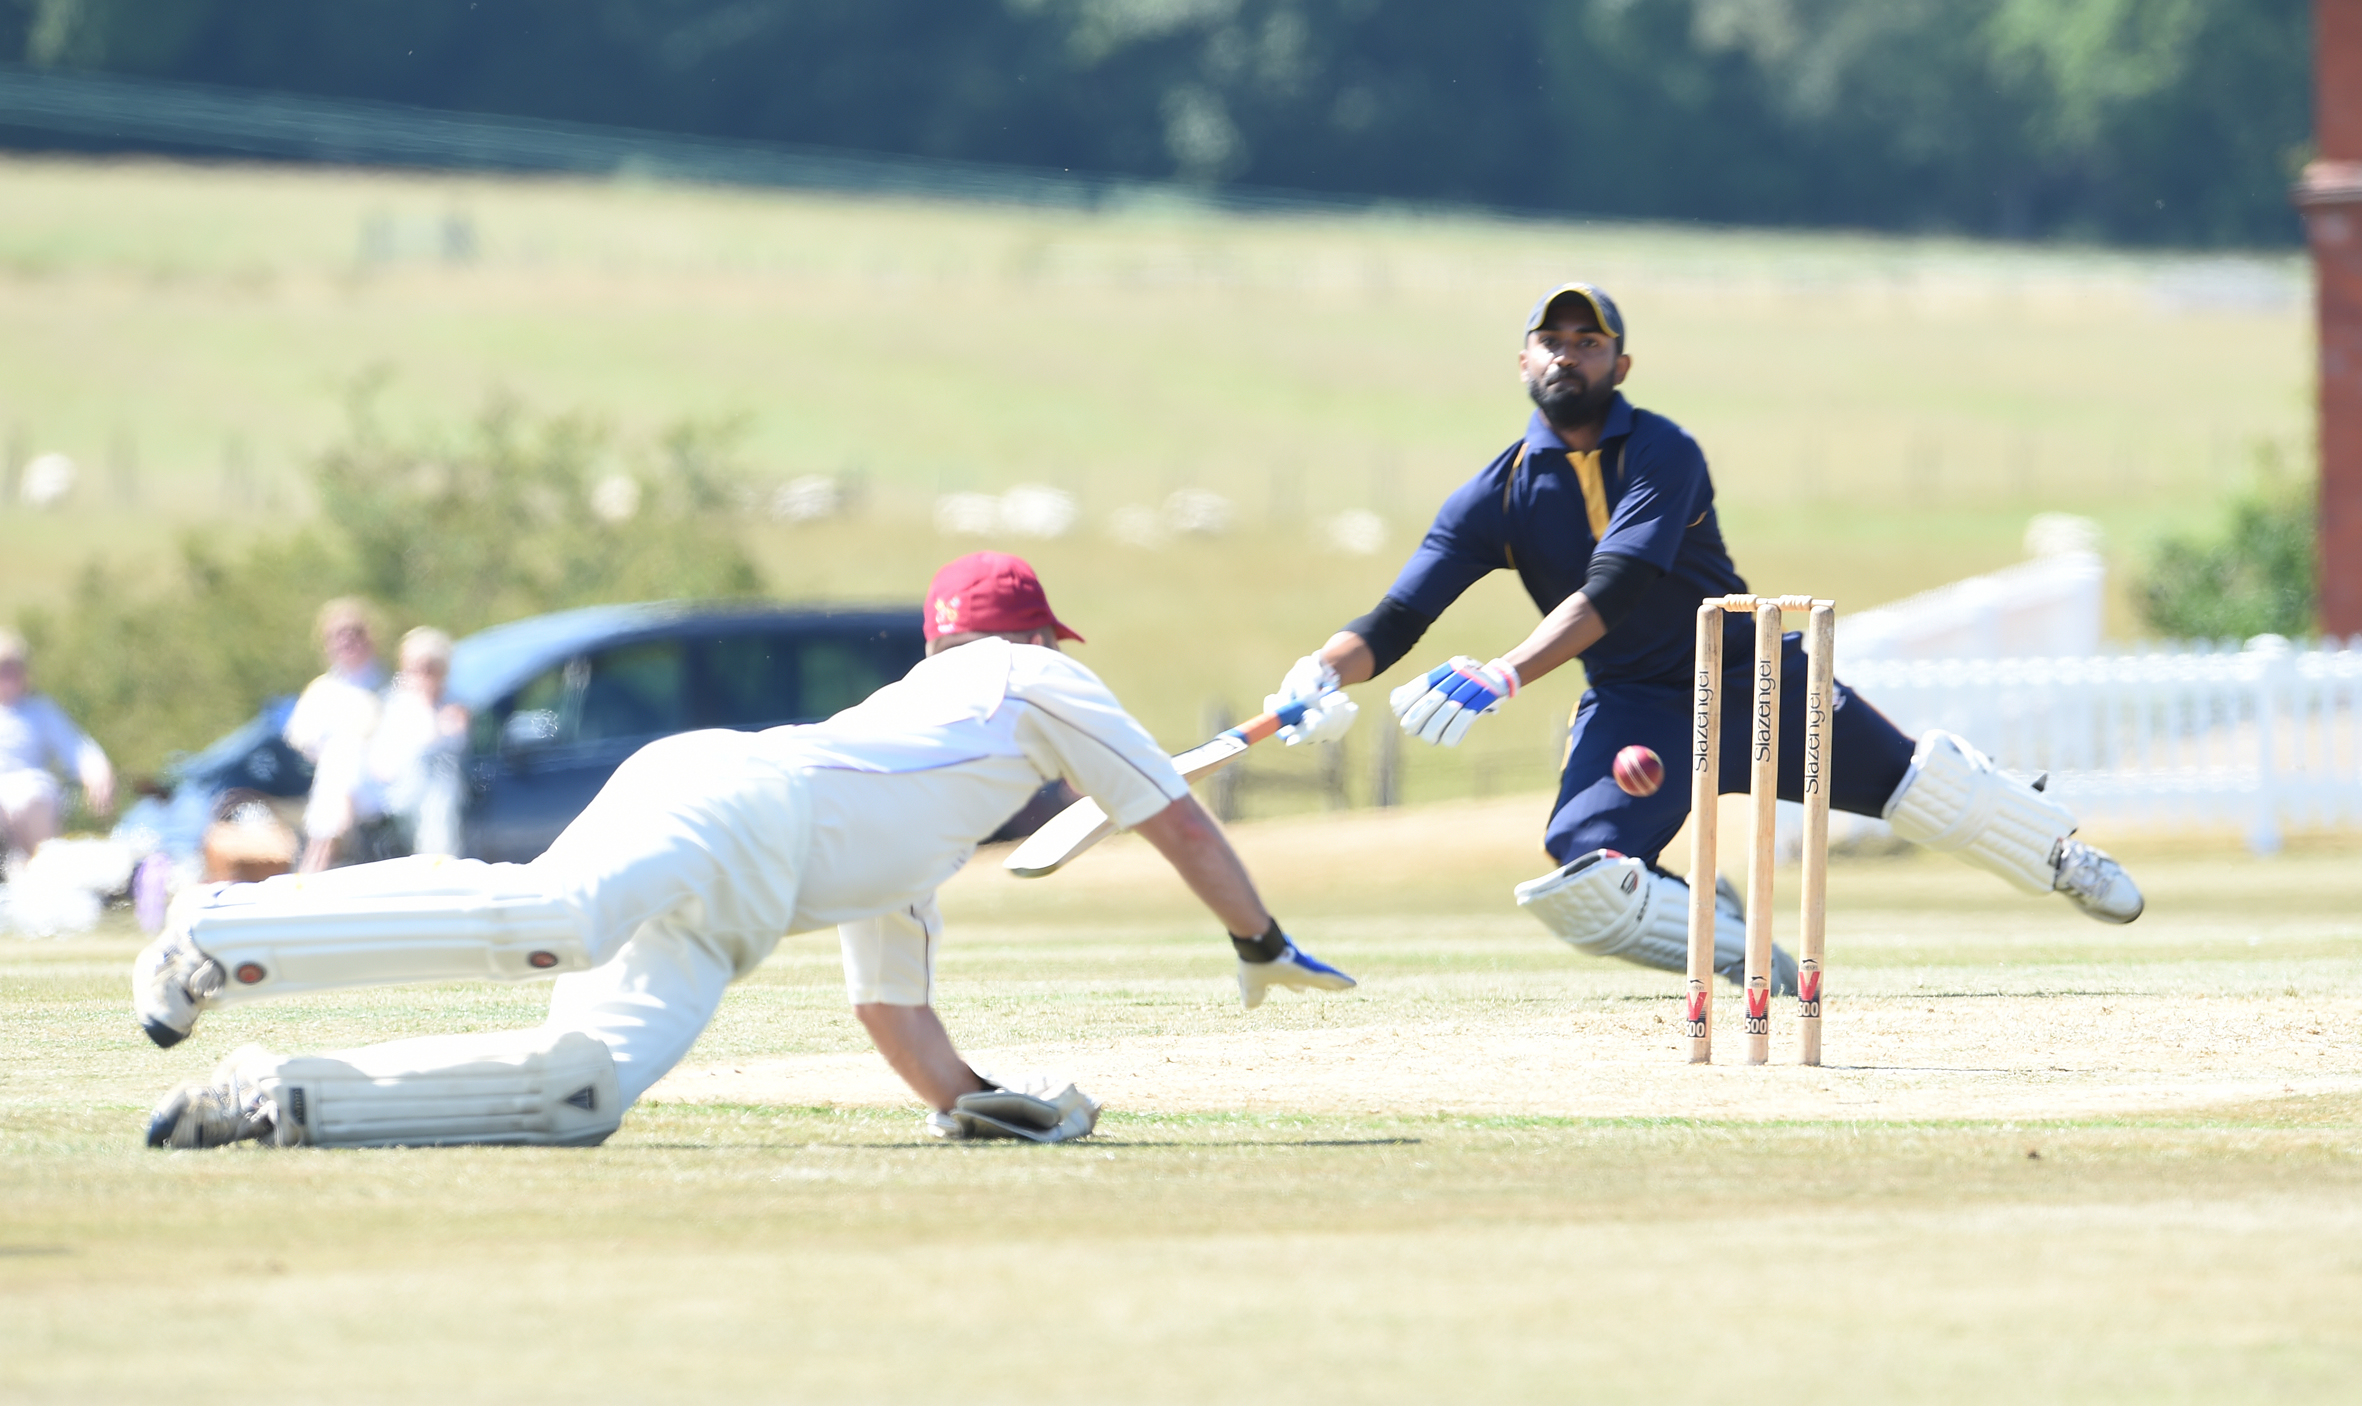 Match report from the sunlit Ribble Valley as the Vatican Cricket Club take on Stonyhurst College Gentlemen's XI